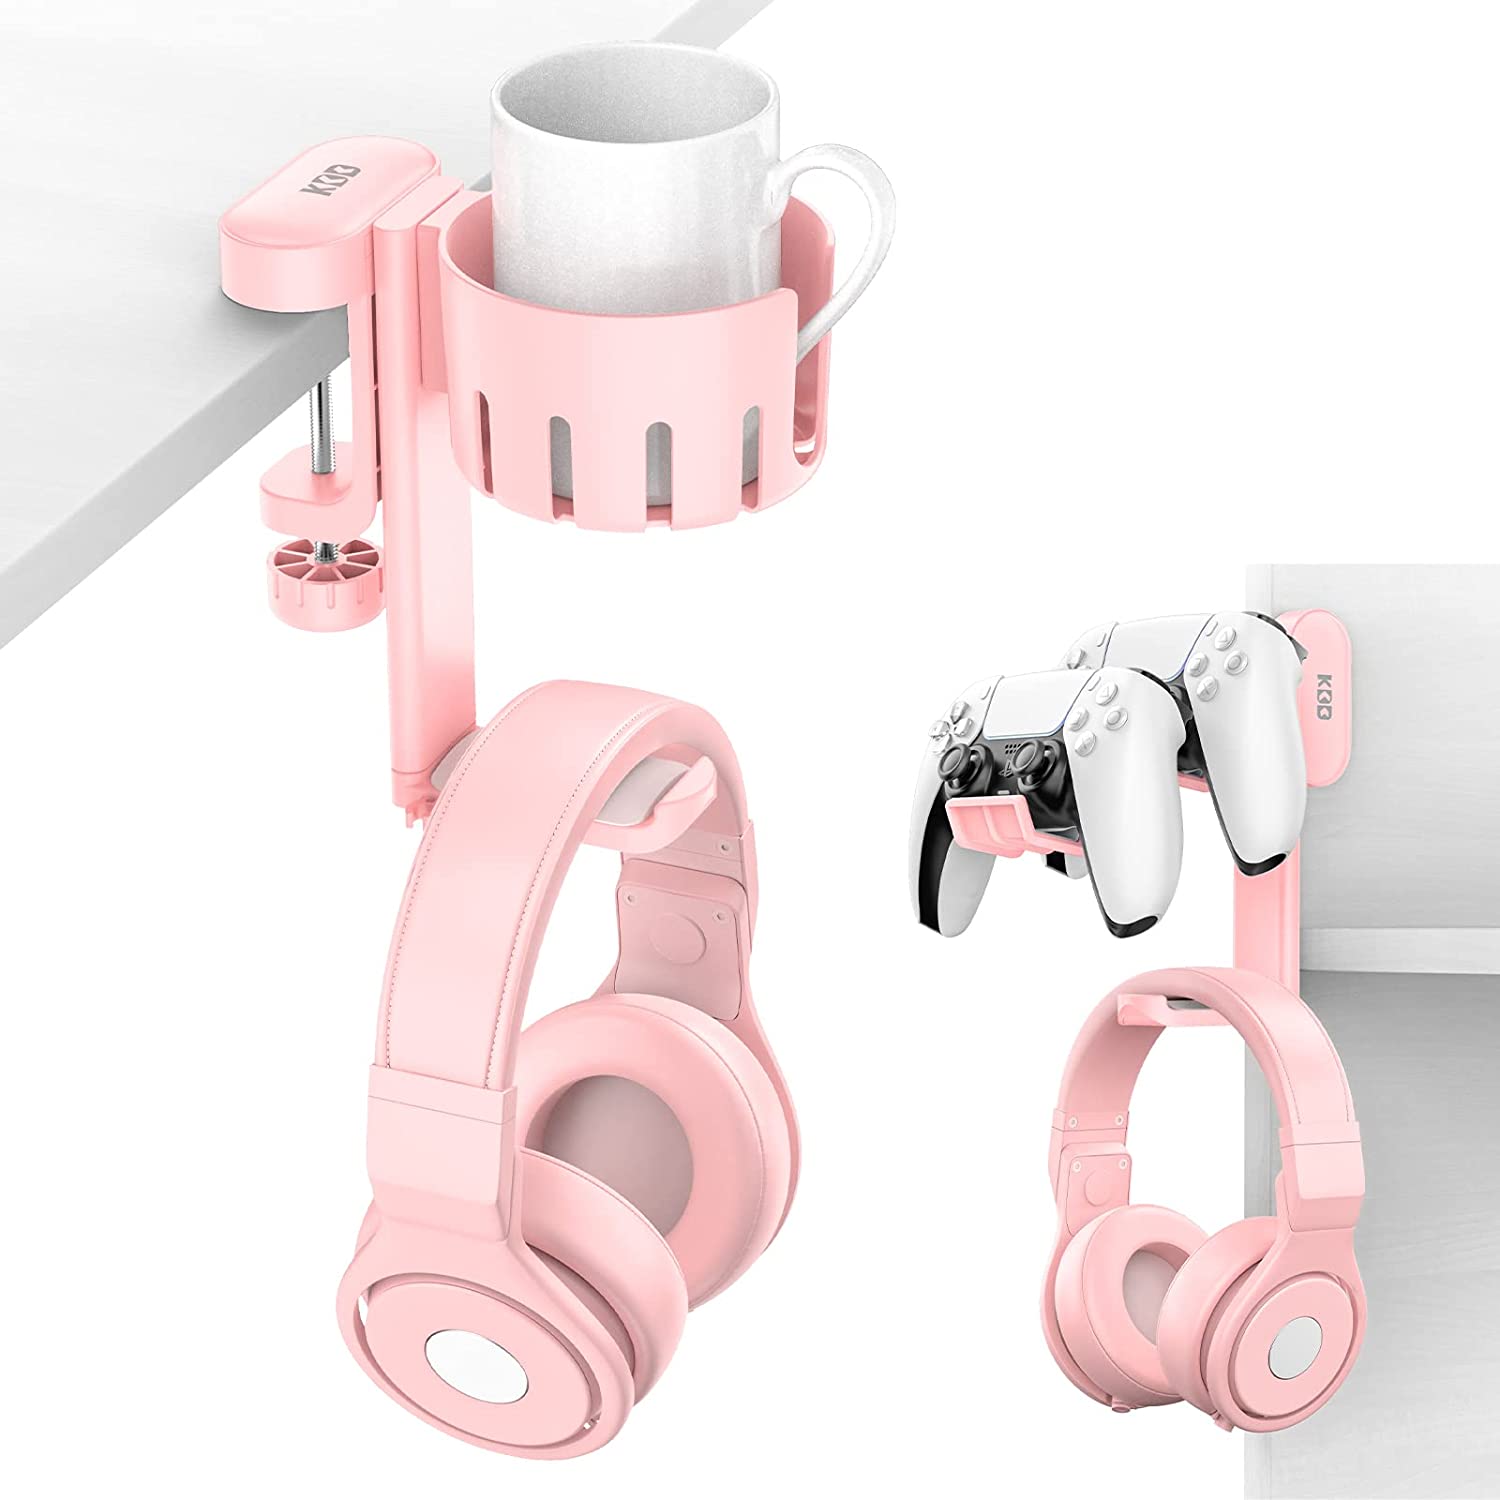 KDD Rotatable Headphone Hanger with cup holder